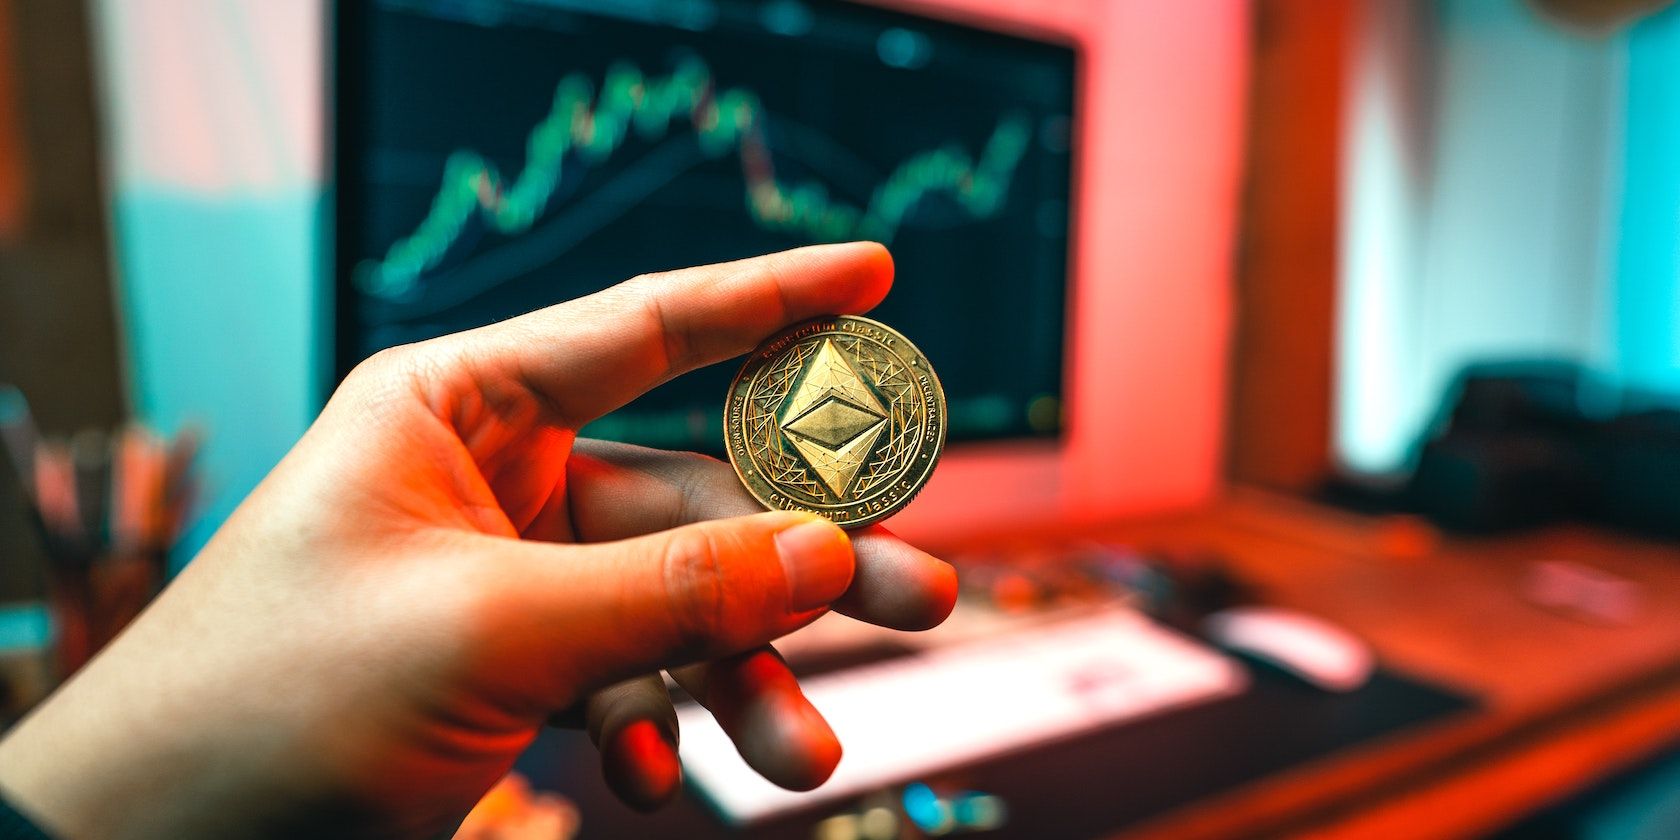 Hand holding an Ethereum coin